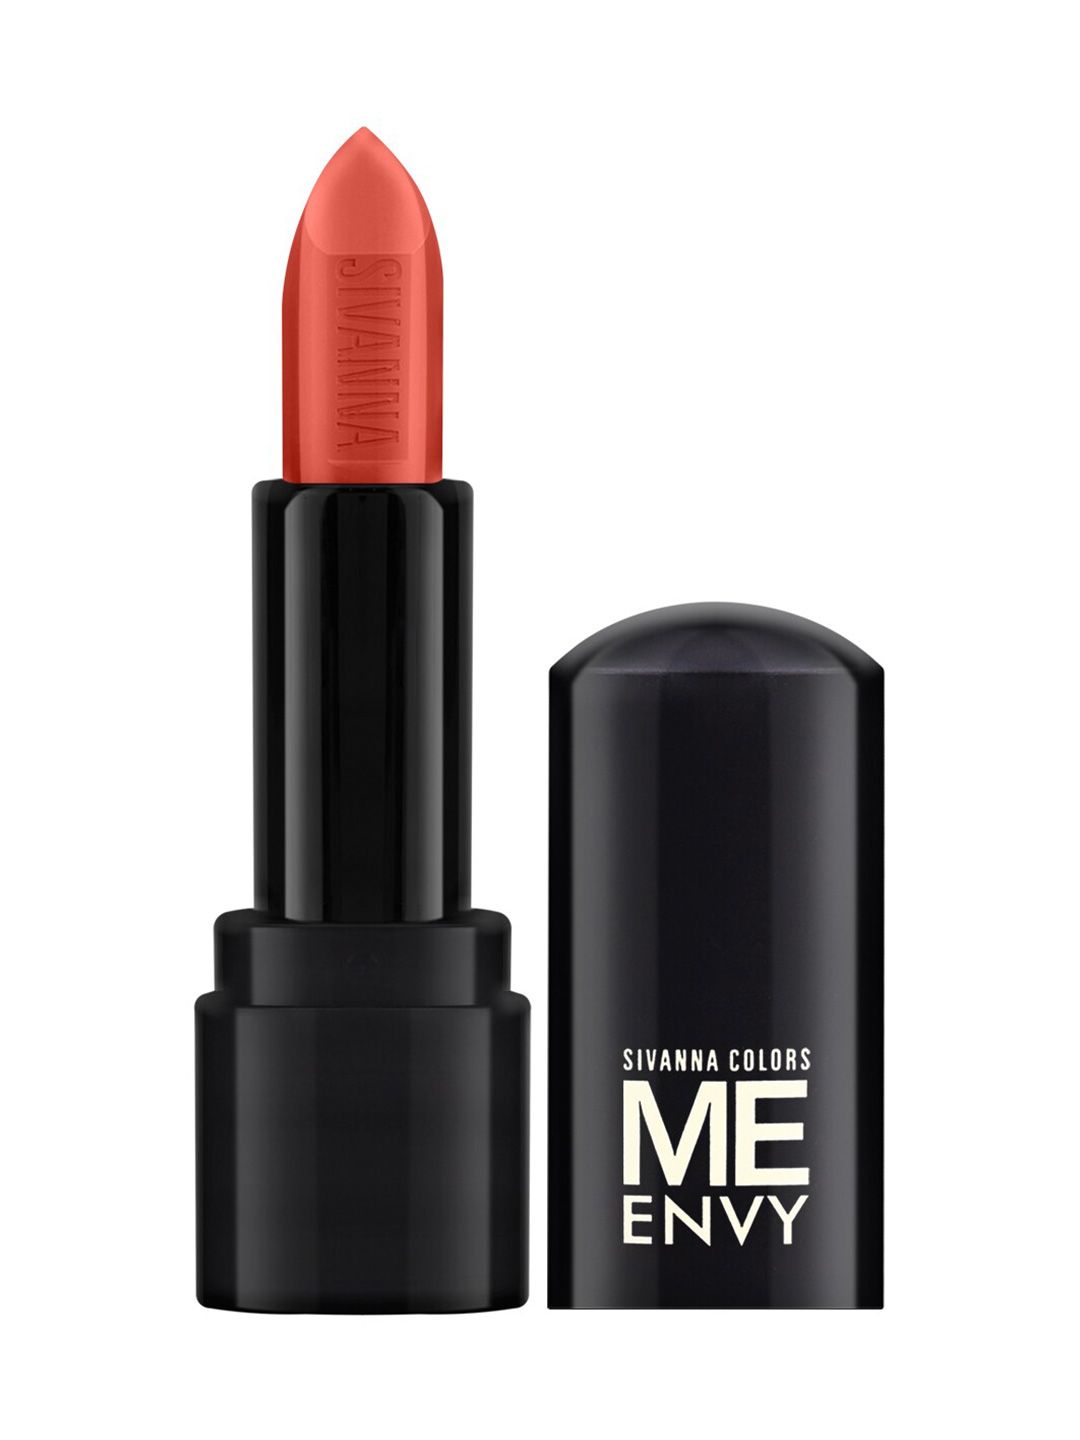 Sivanna Colors Red Me Envy Matte & Gloosy Lipstick-HF5011 04 Price in India